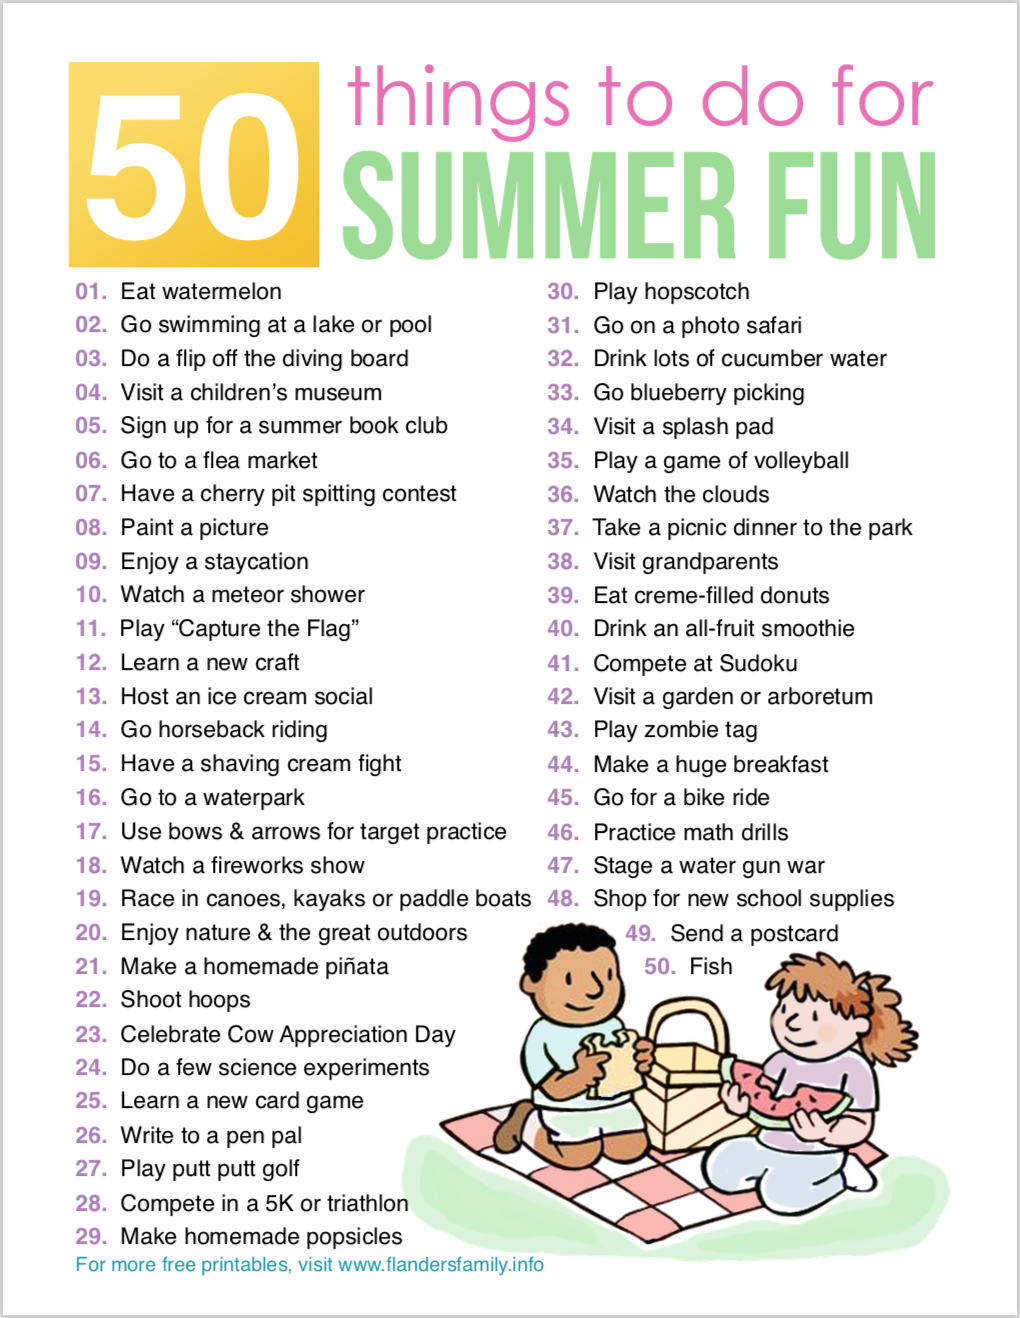 Fun Things To Do In The Summer - www.inf-inet.com